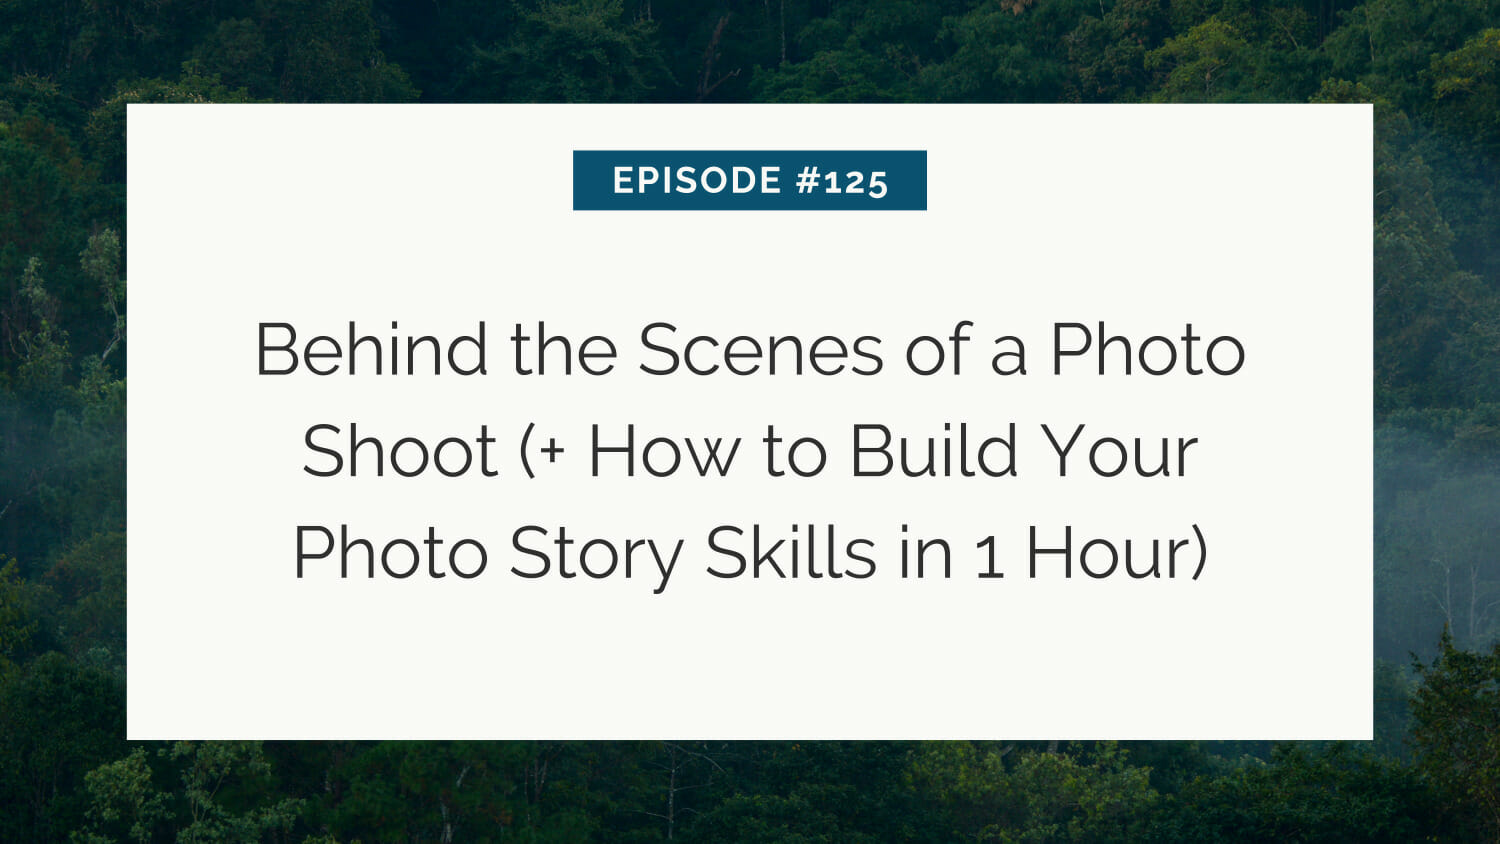 Slide with episode number and topics on photo shoot behind-the-scenes and photo storytelling skills.